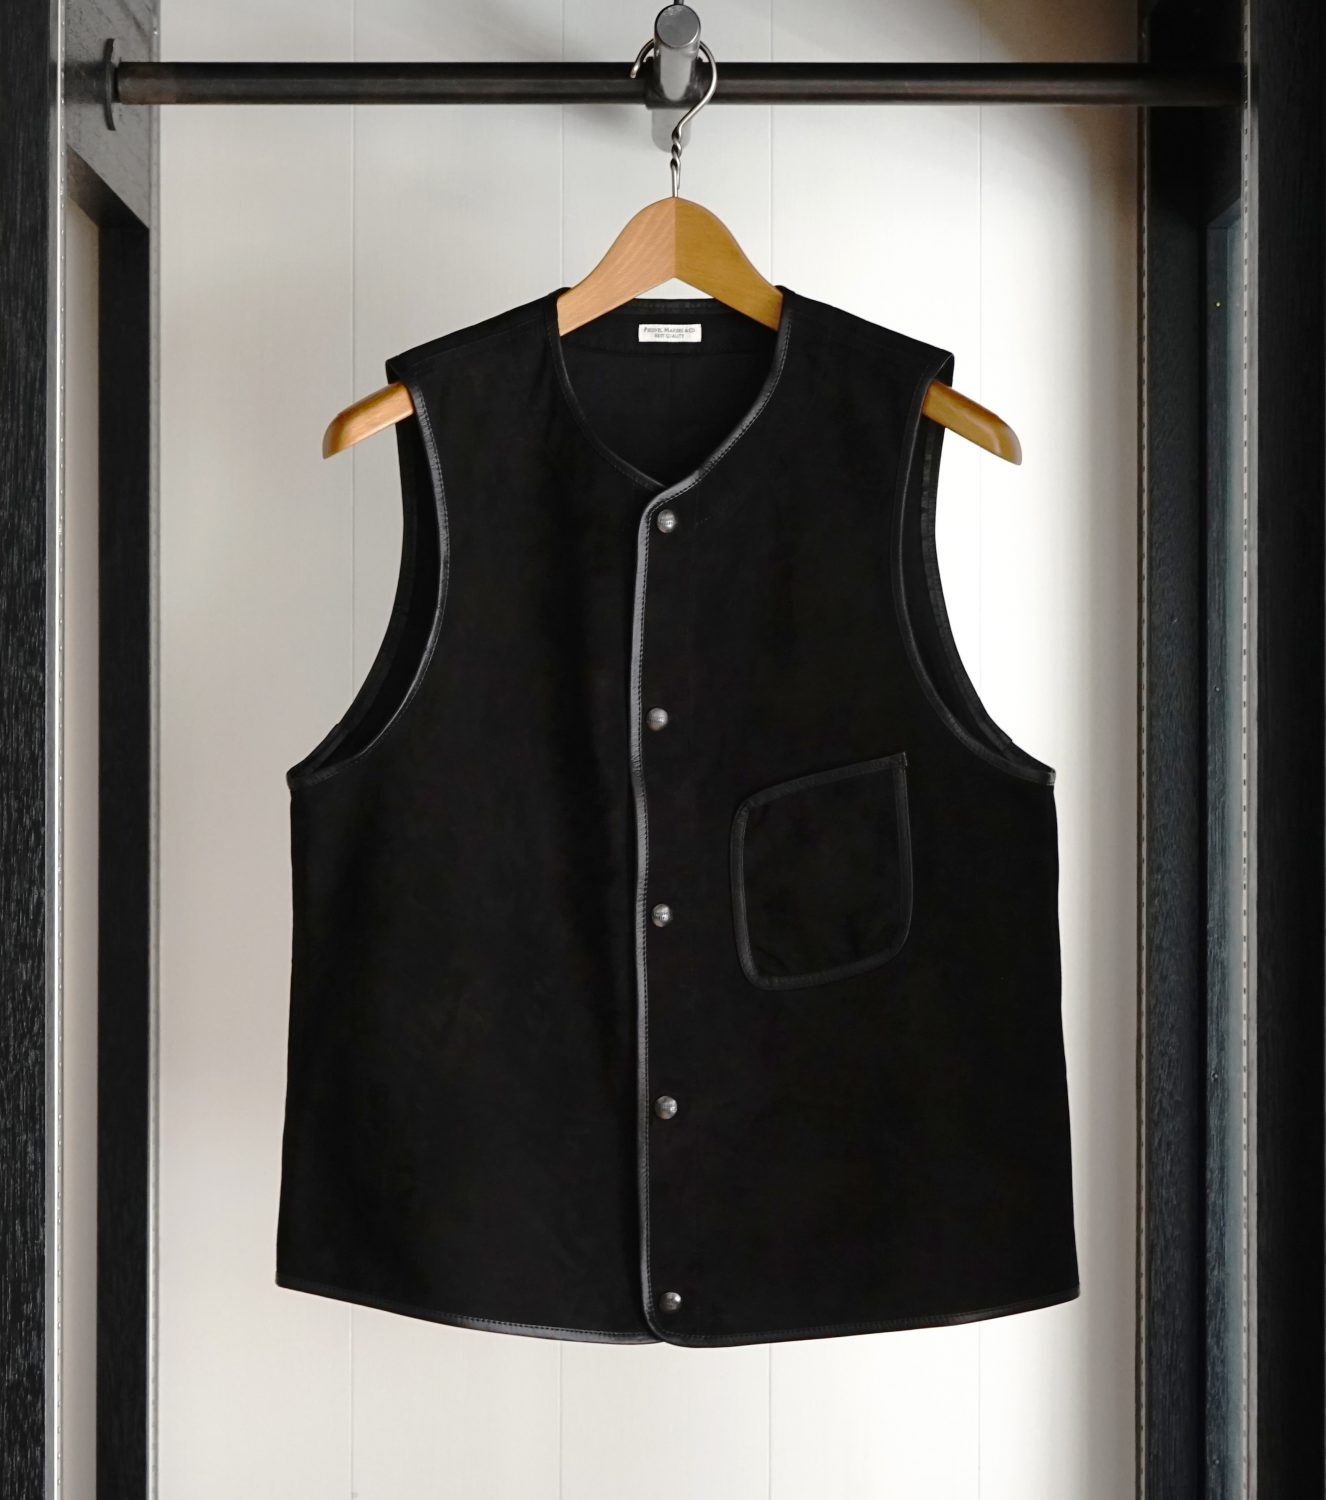 Limited Products “Nubuck Vest”